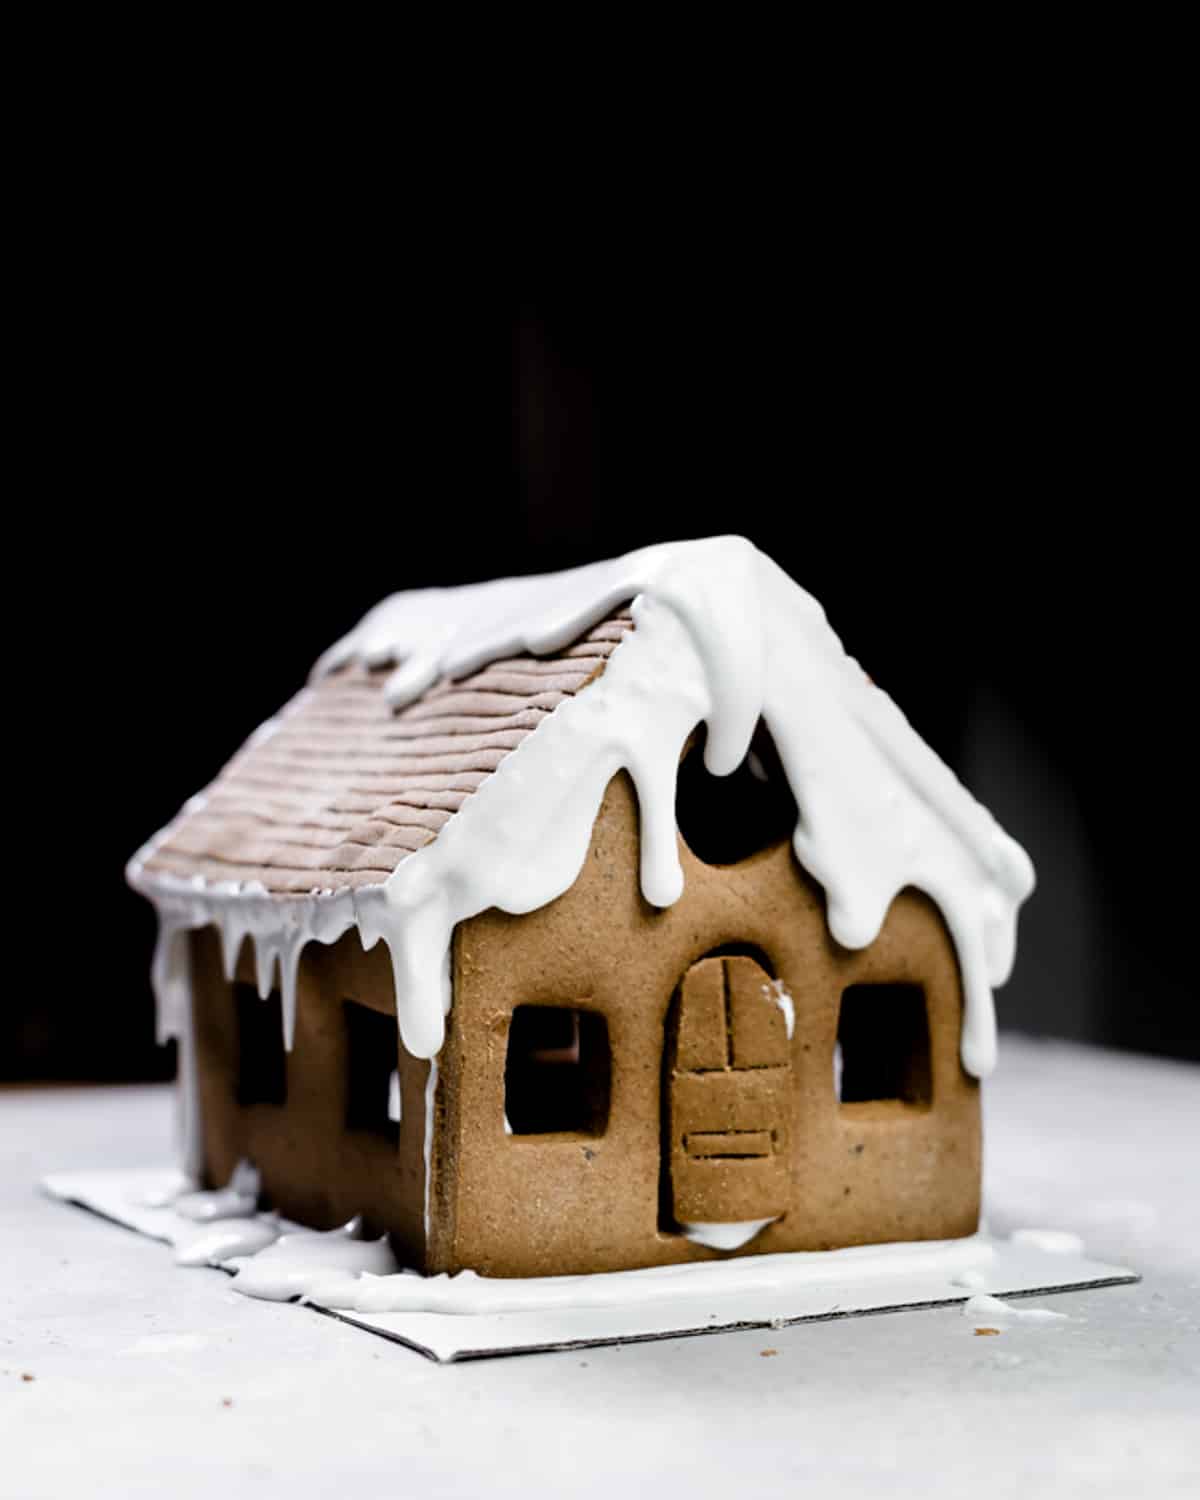 vegan gingerbread house with royal icing snow on top